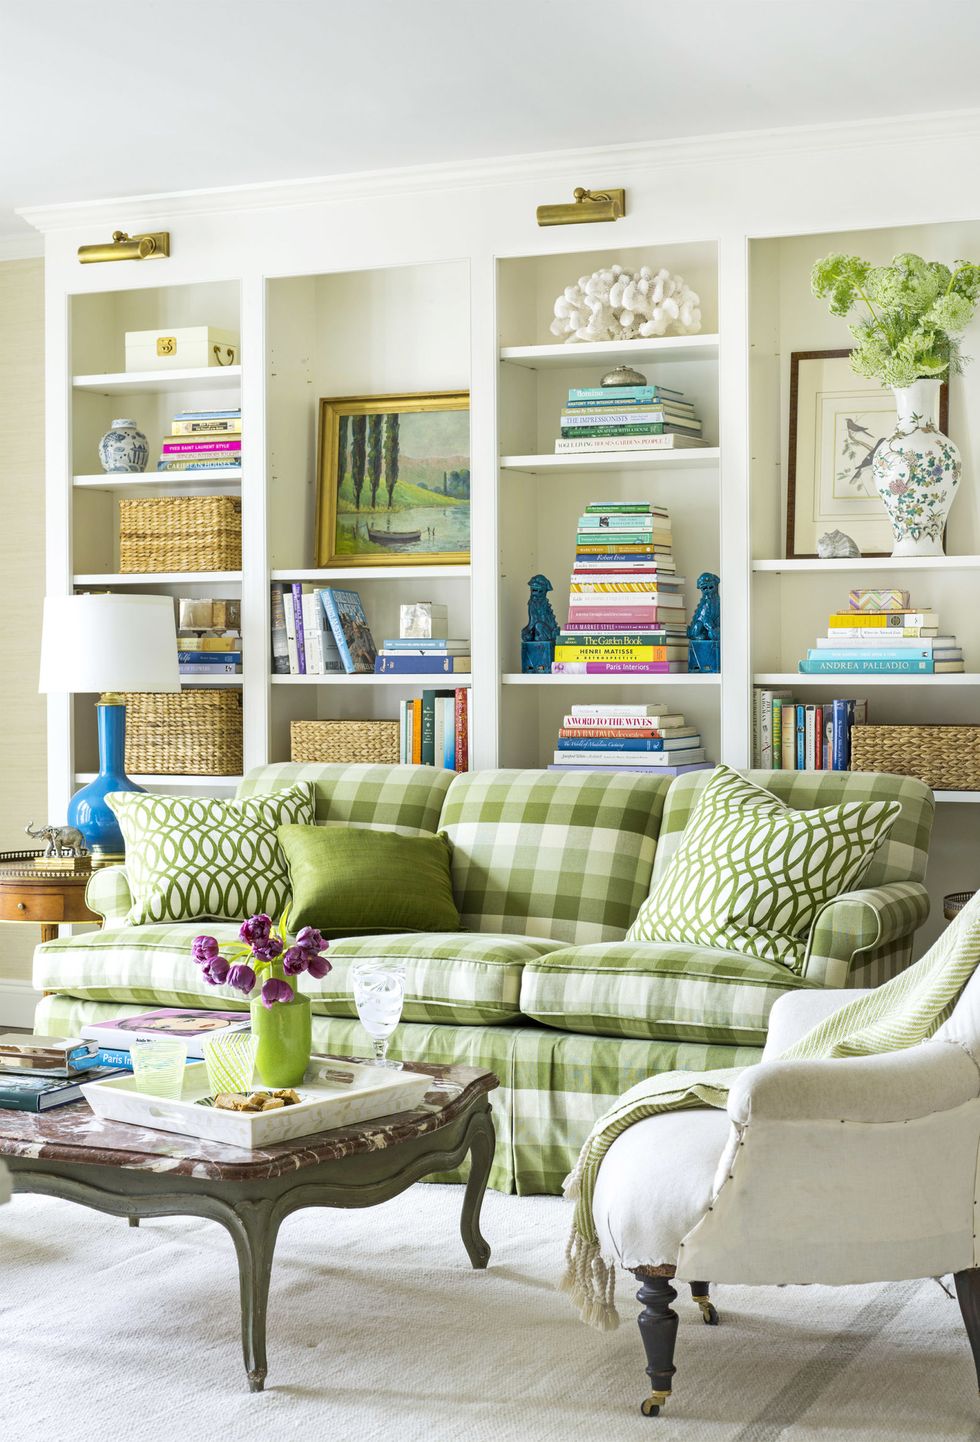 How to Decorate With Mint Green - 25 Colors to Pair With Mint Decor